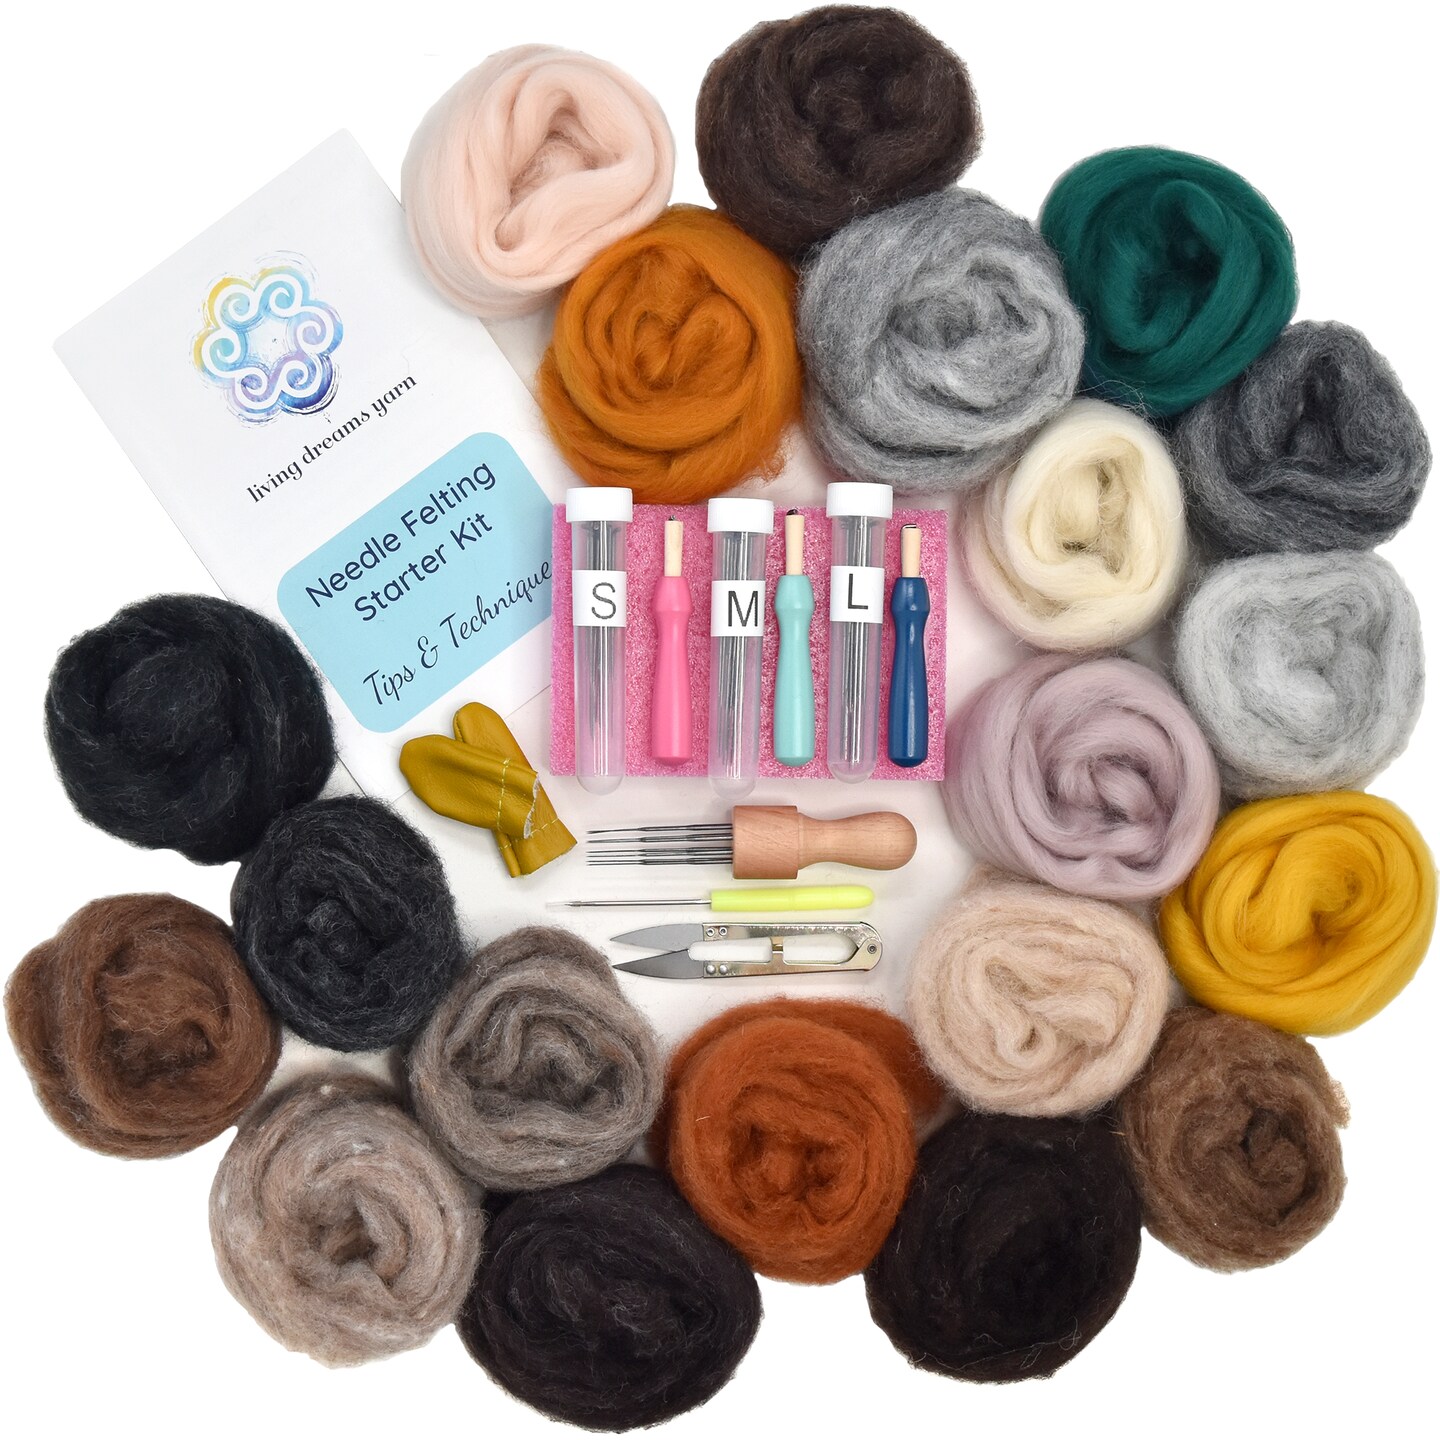 Living Dreams Premium Needle Felting Starter Kit Includes 20 Variegated  Wool Colors, 50 Needles and Tools, Text and Video Guide. Craft Kit for  Beginners, Kids and Adults